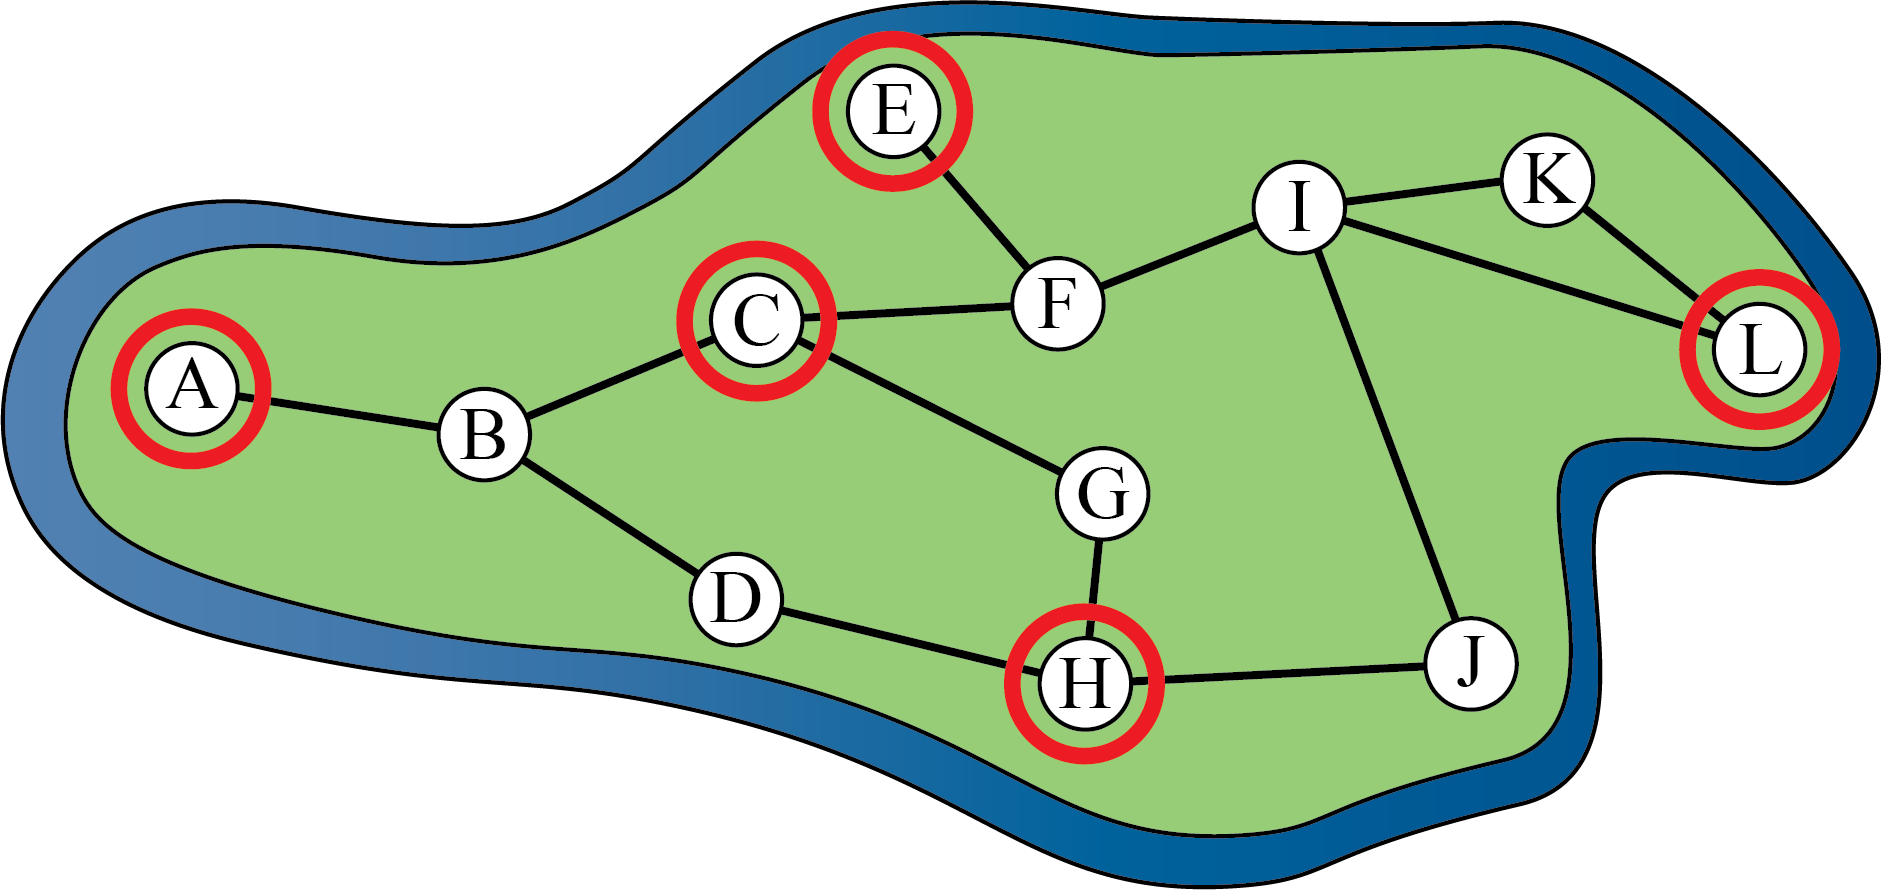 Towns
A, C, E, H and L are circled.